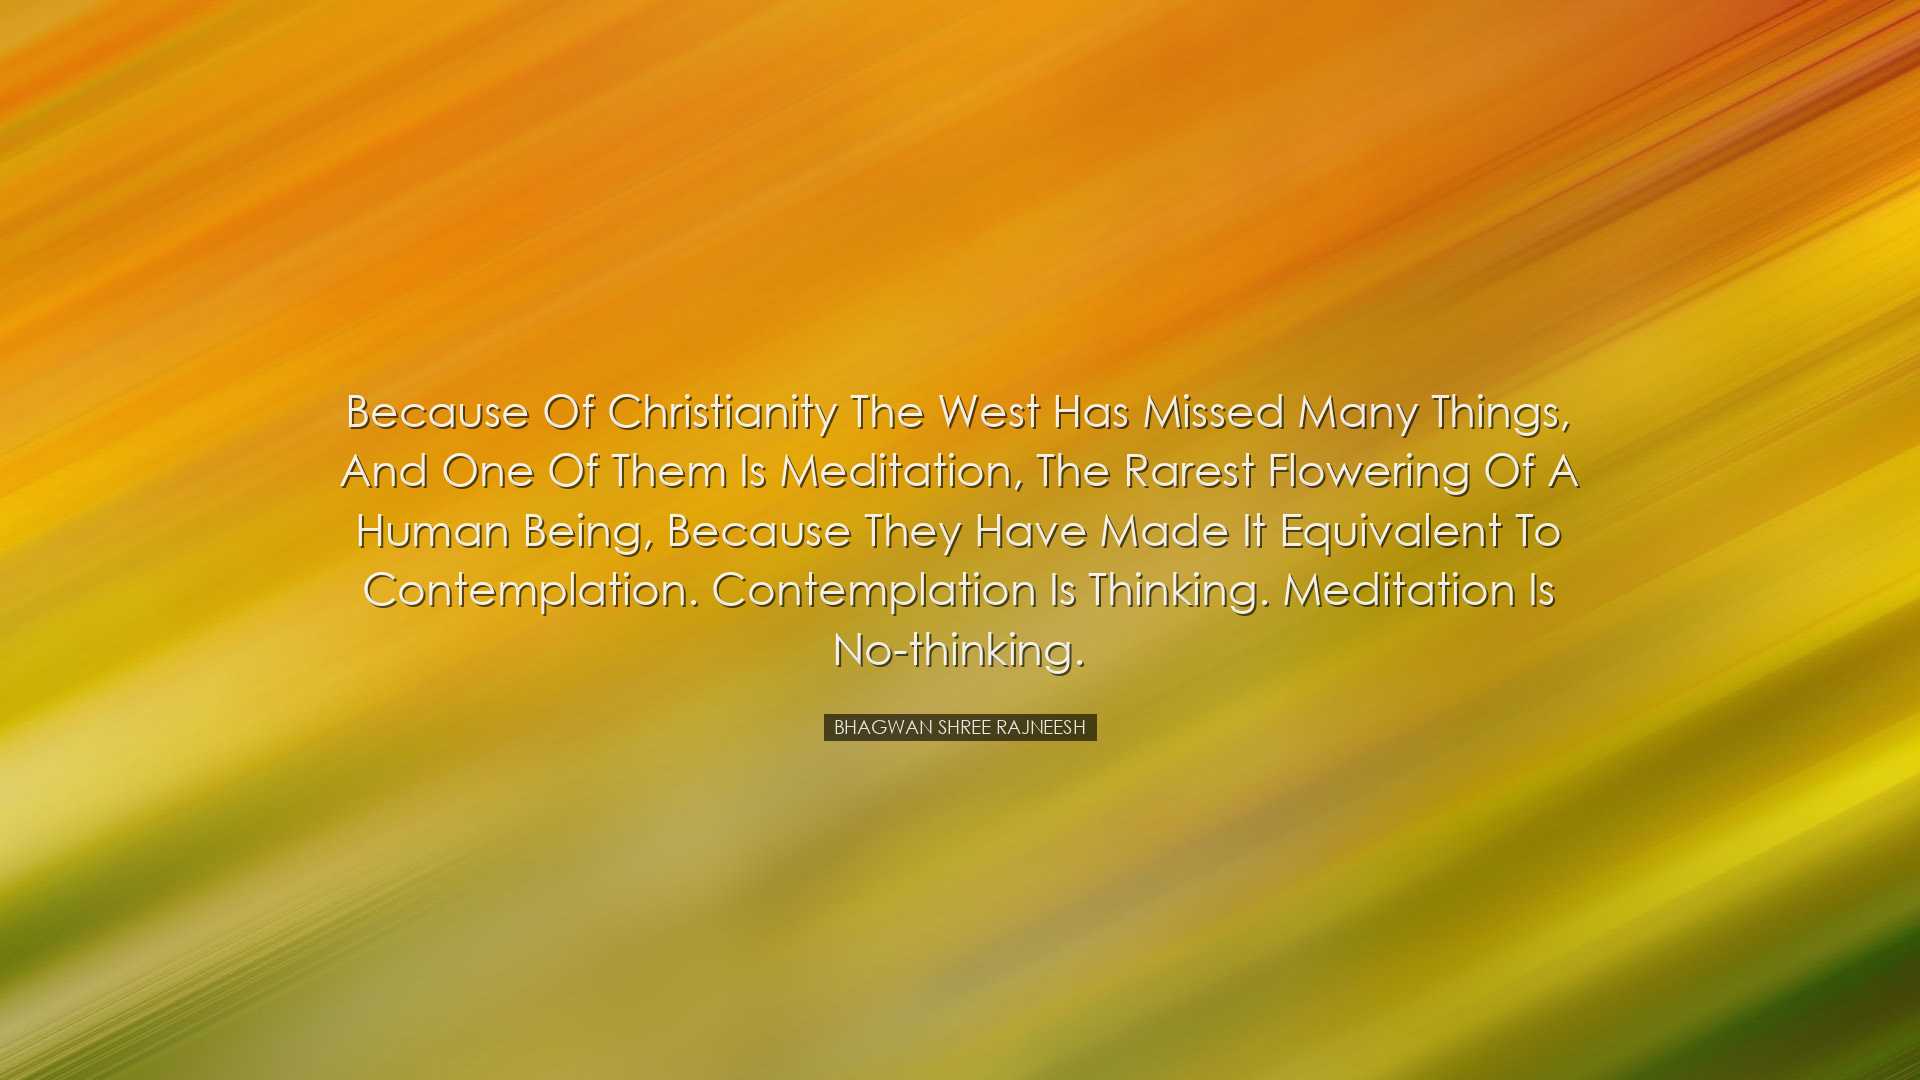 Because of Christianity the West has missed many things, and one o